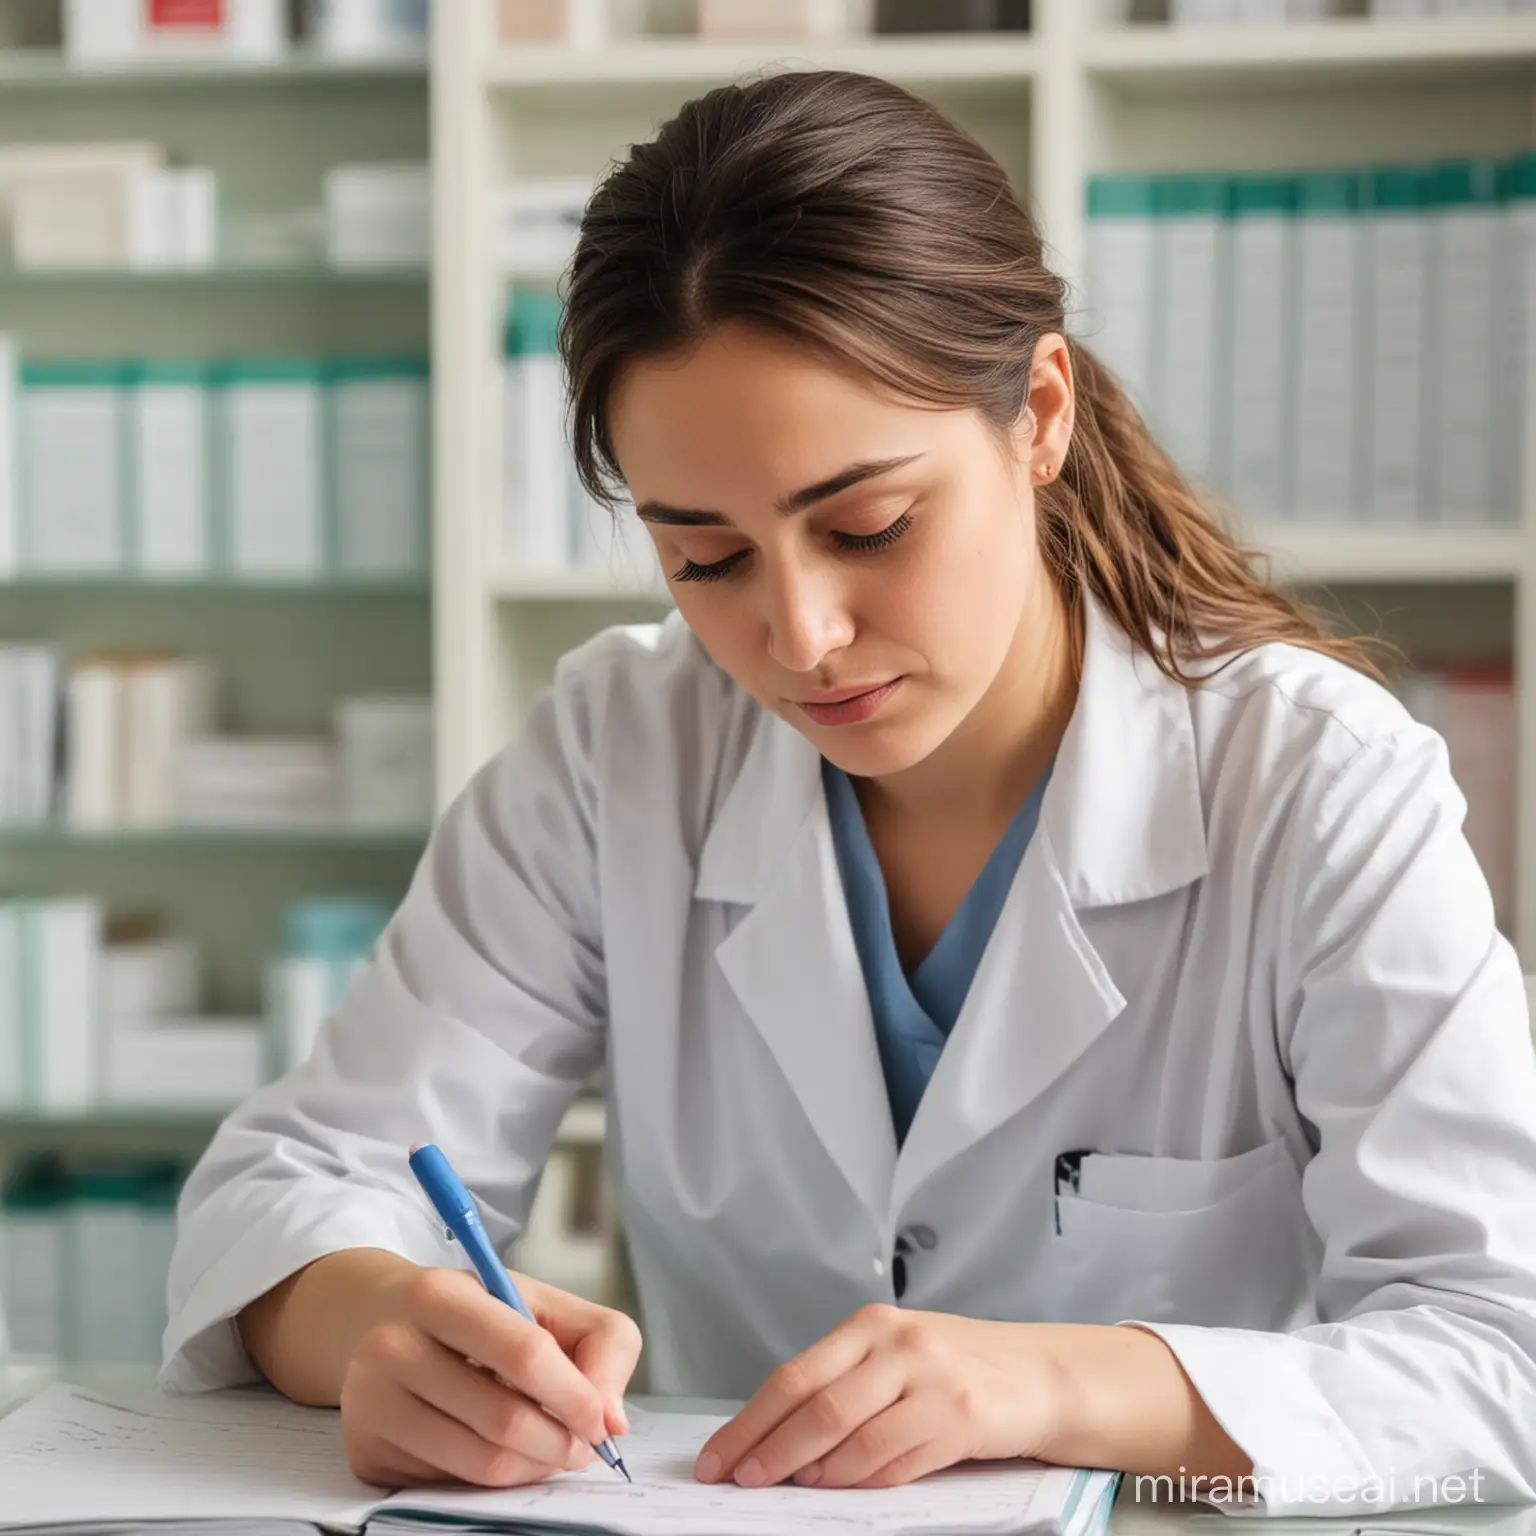 Emotional Pharmacist Reflecting in Diary with Tears